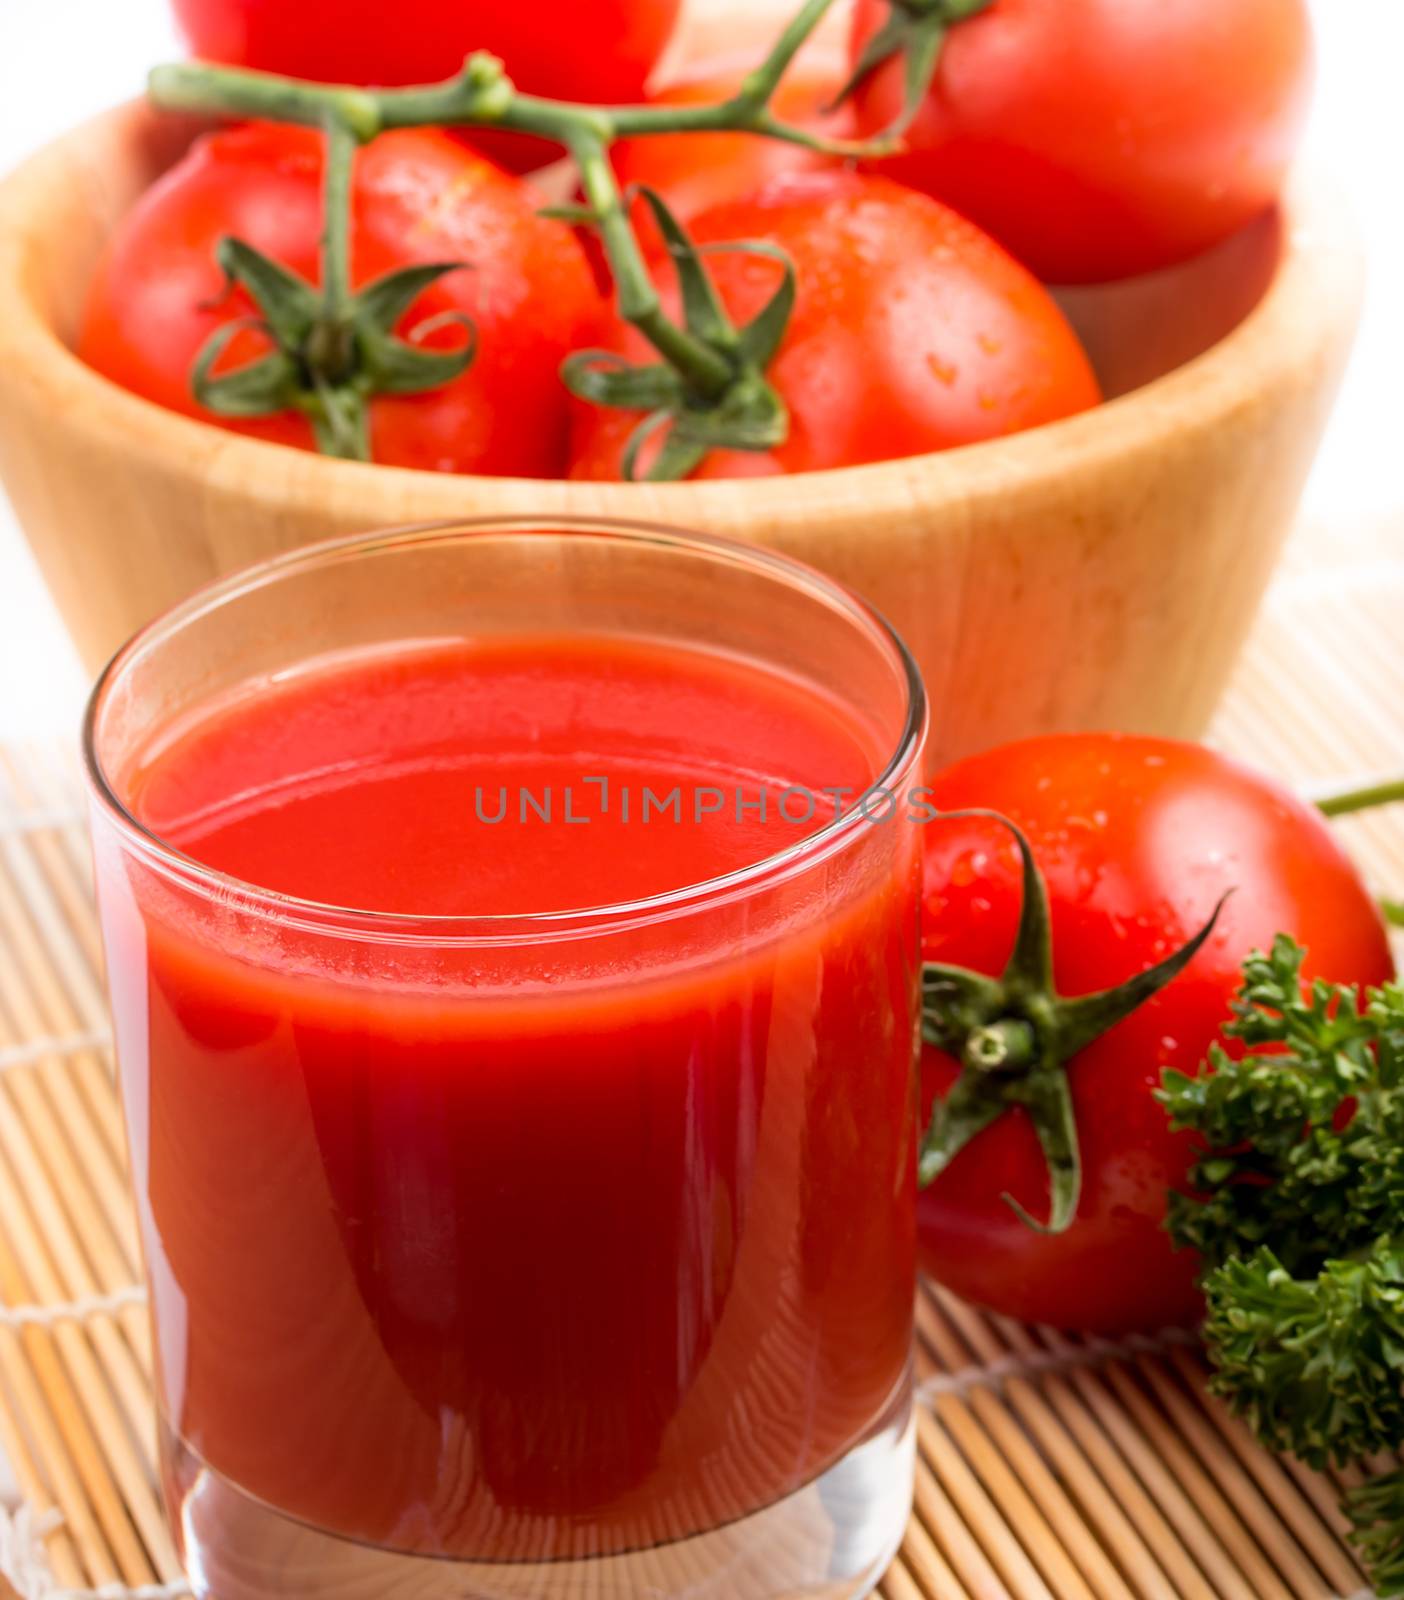 Tomato Vegetable Juice Represents Refreshing Drinks And Beverage  by stuartmiles